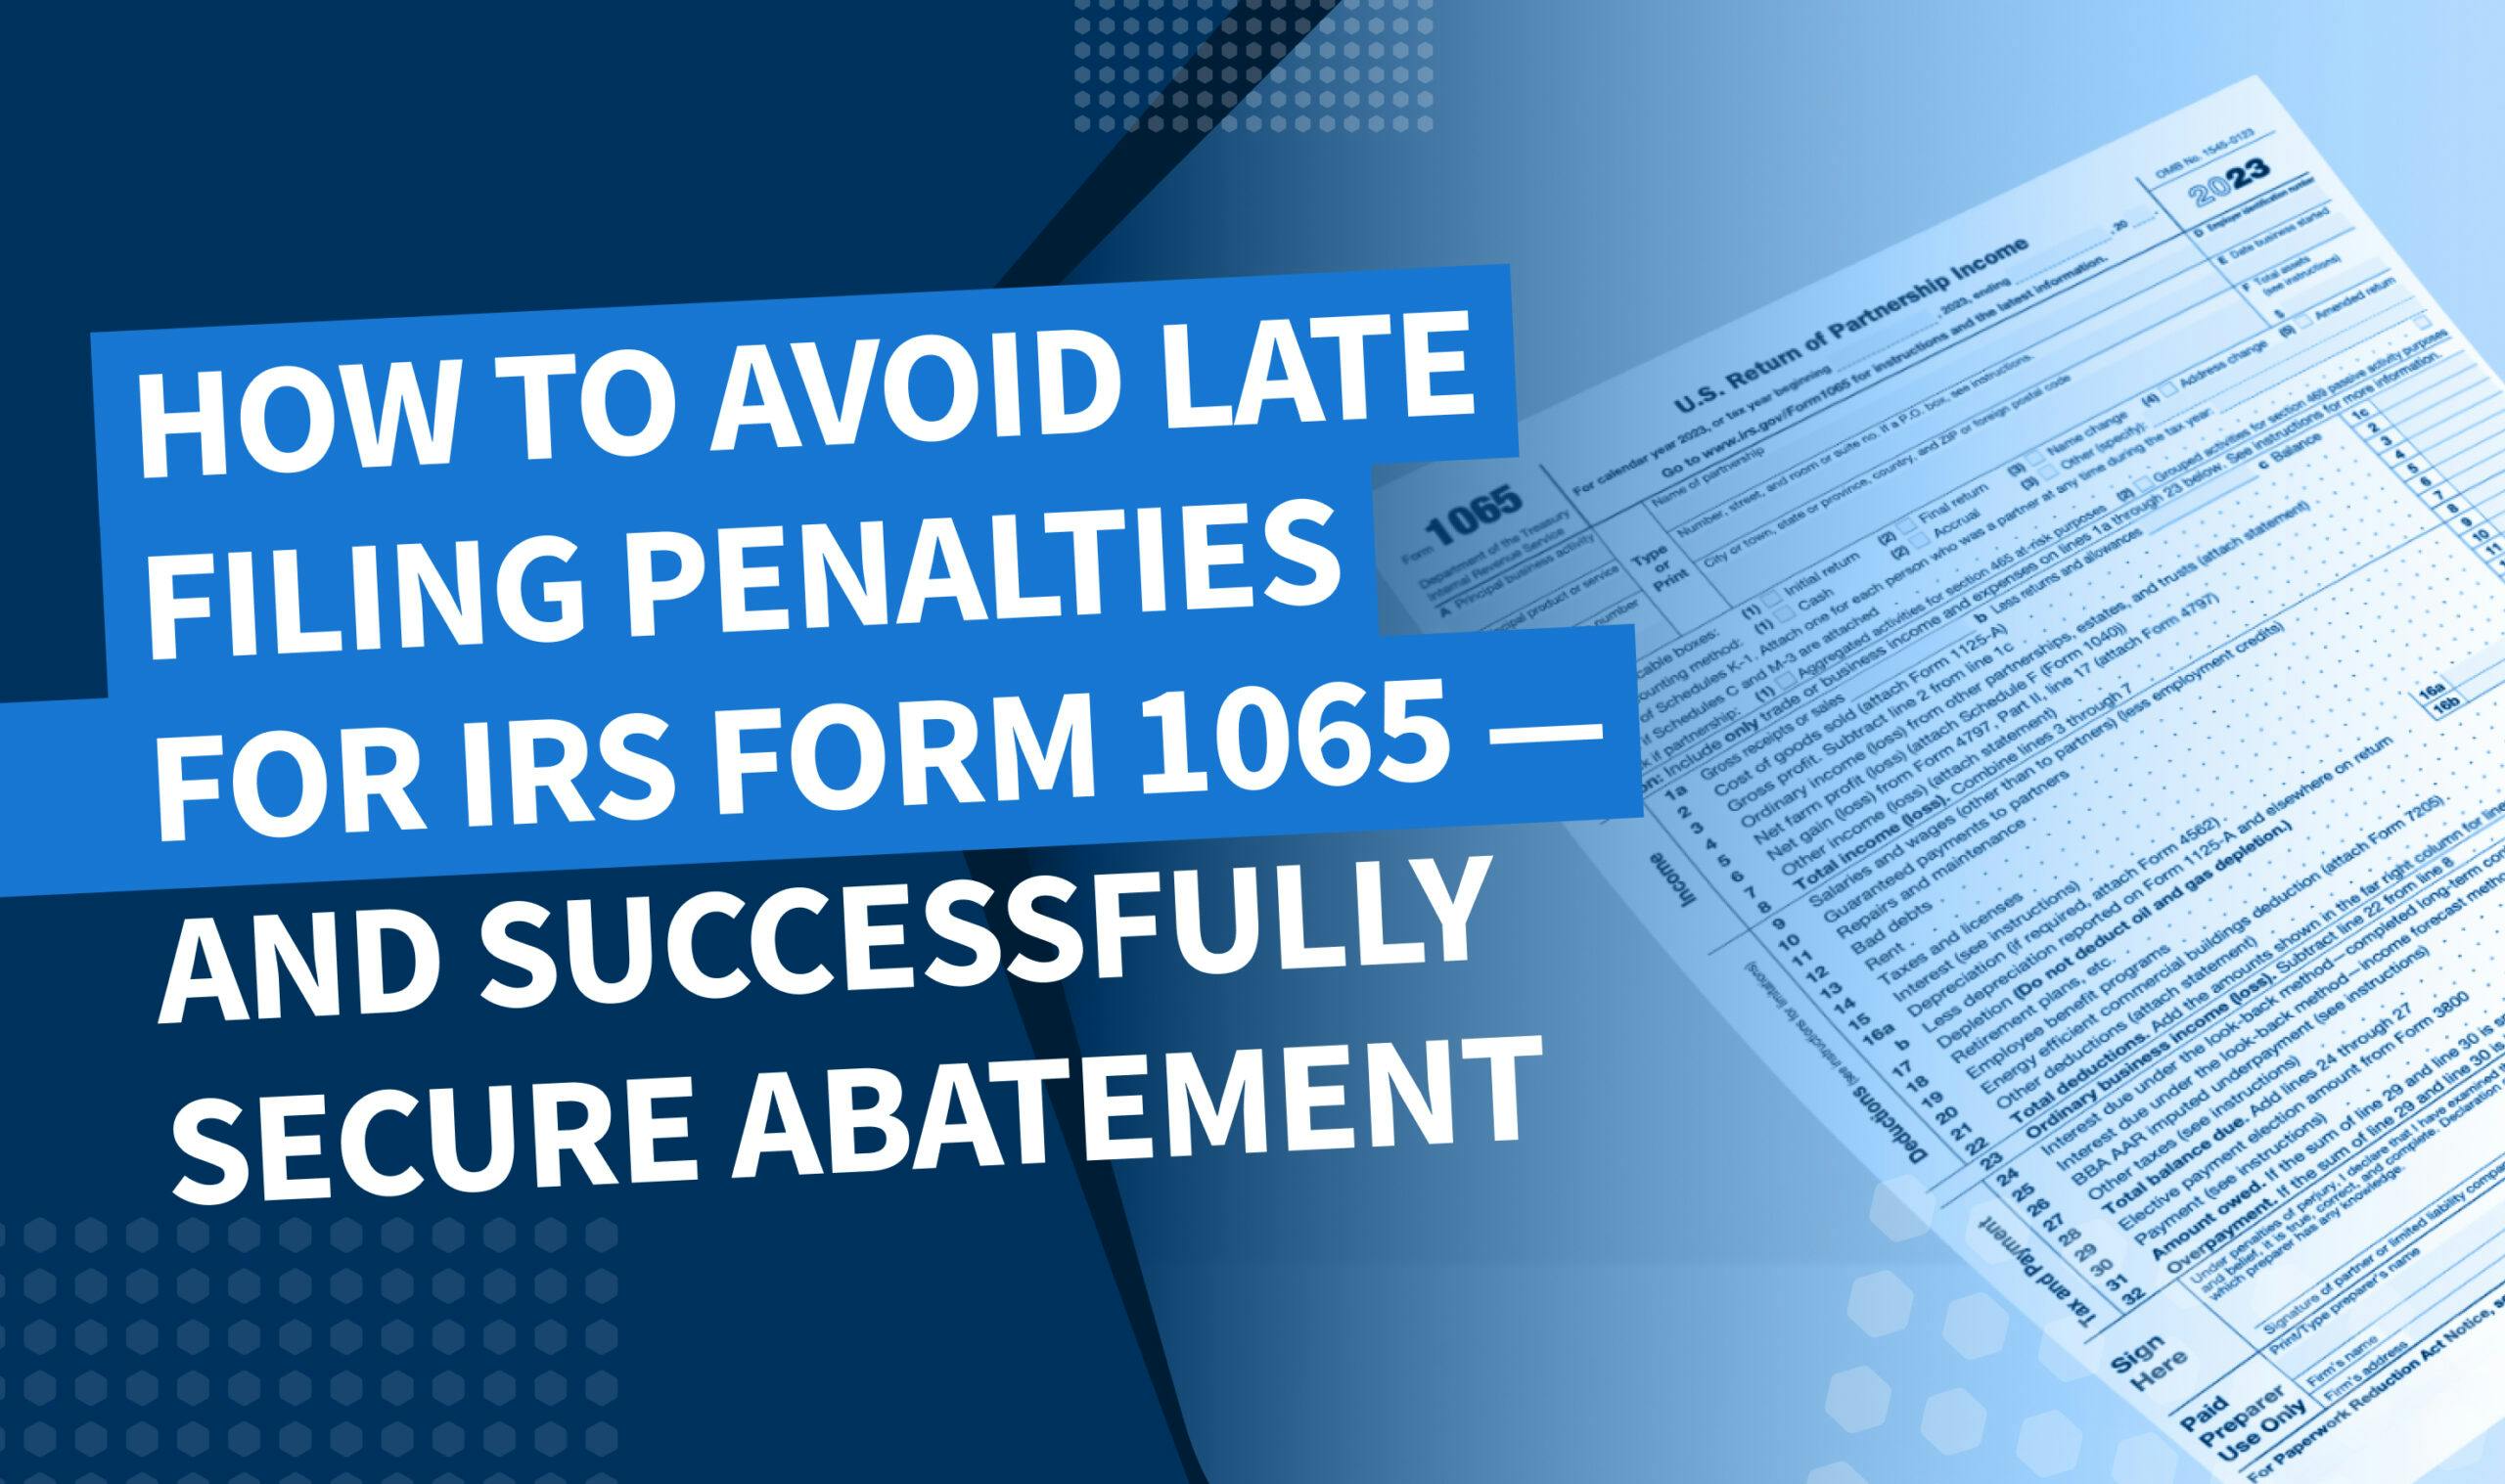 How to avoid late filing penalties for IRS Form 1065 — and successfully secure abatement